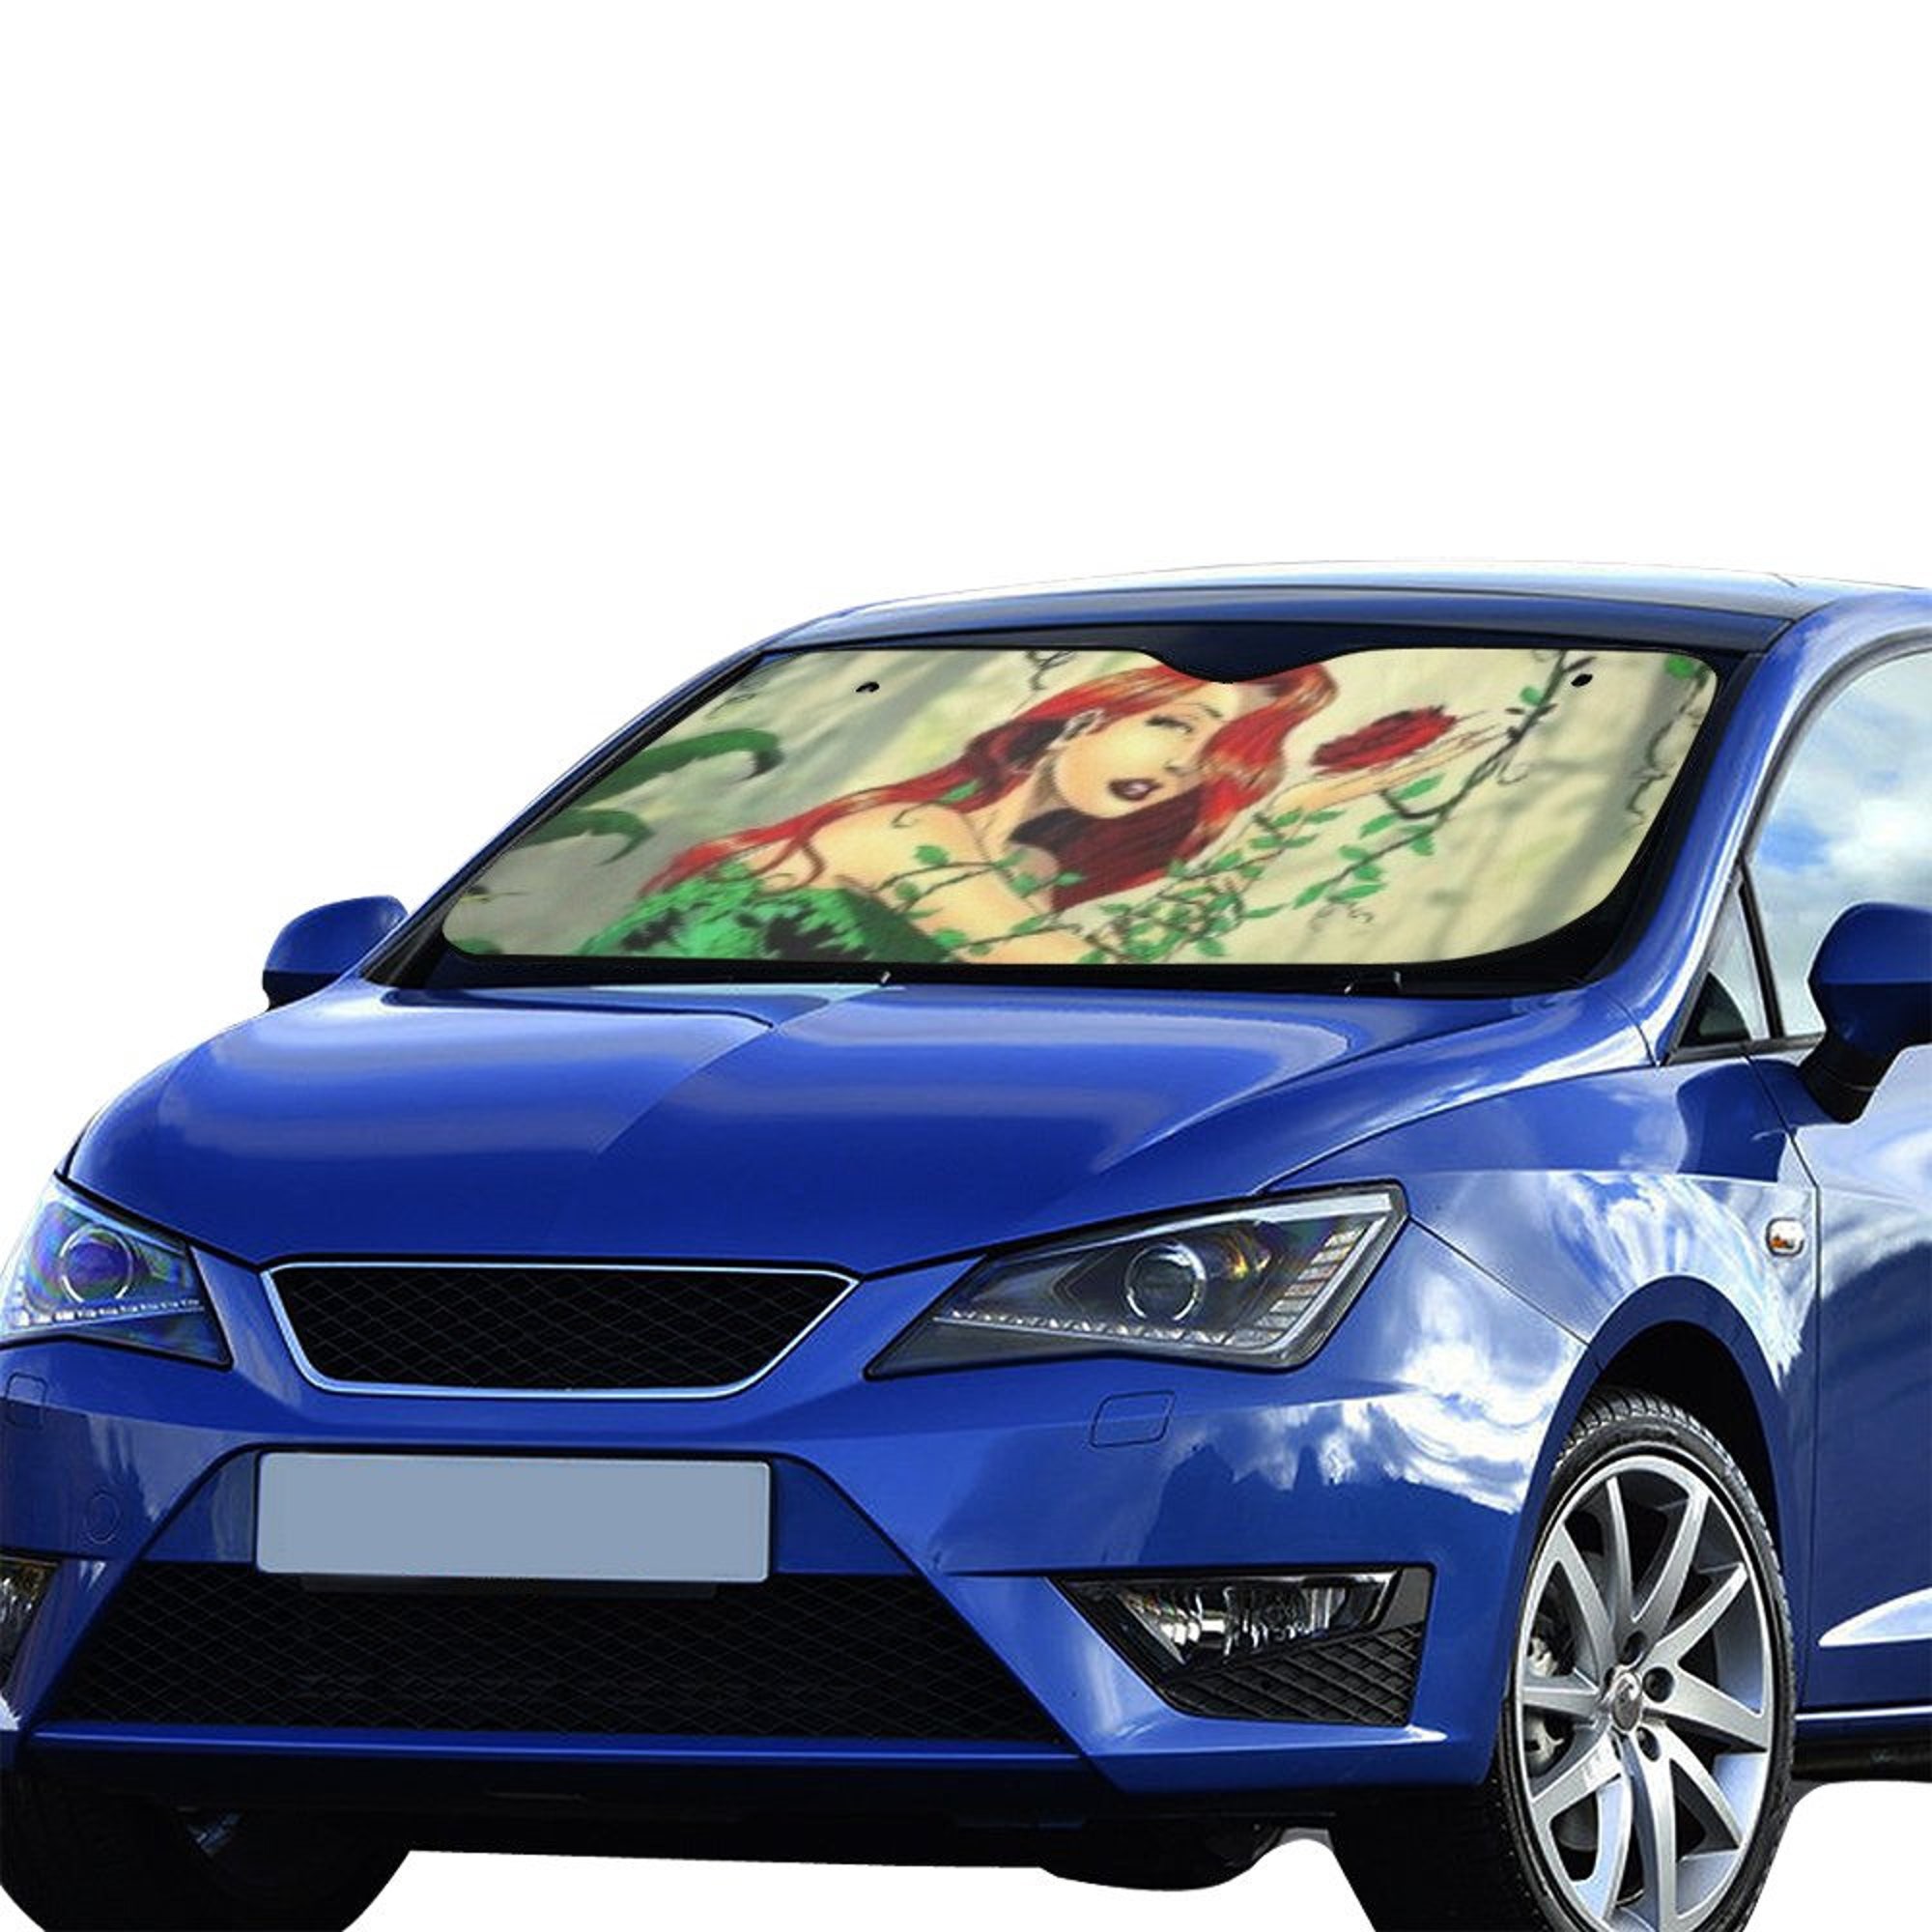 Poison Ivy Car Sun Shade Cover Travelling Birthday